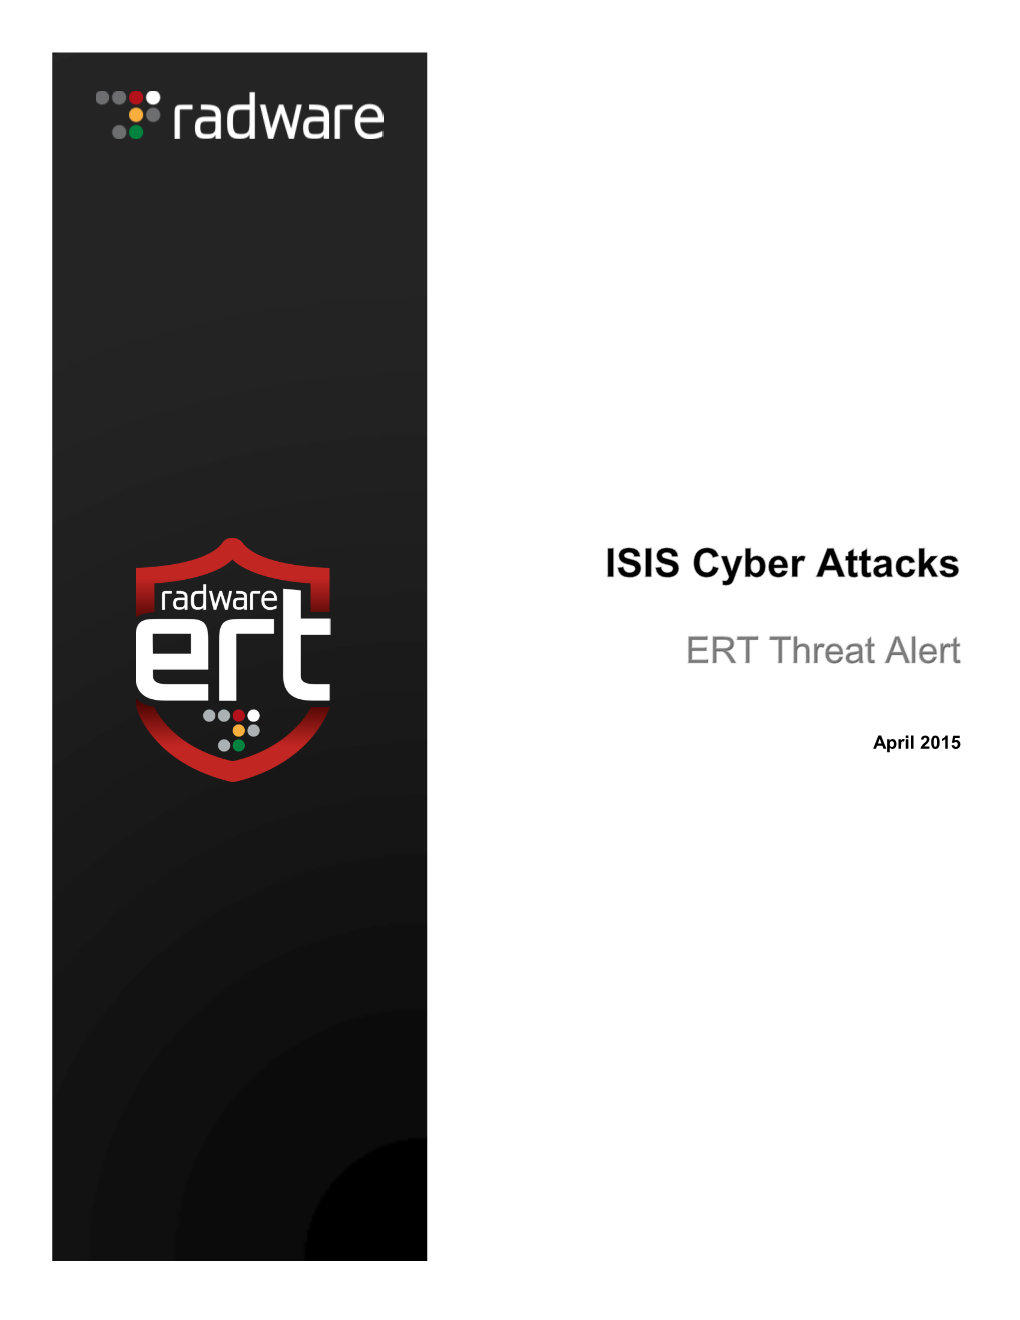 ISIS Cyber Attacks April, 2015